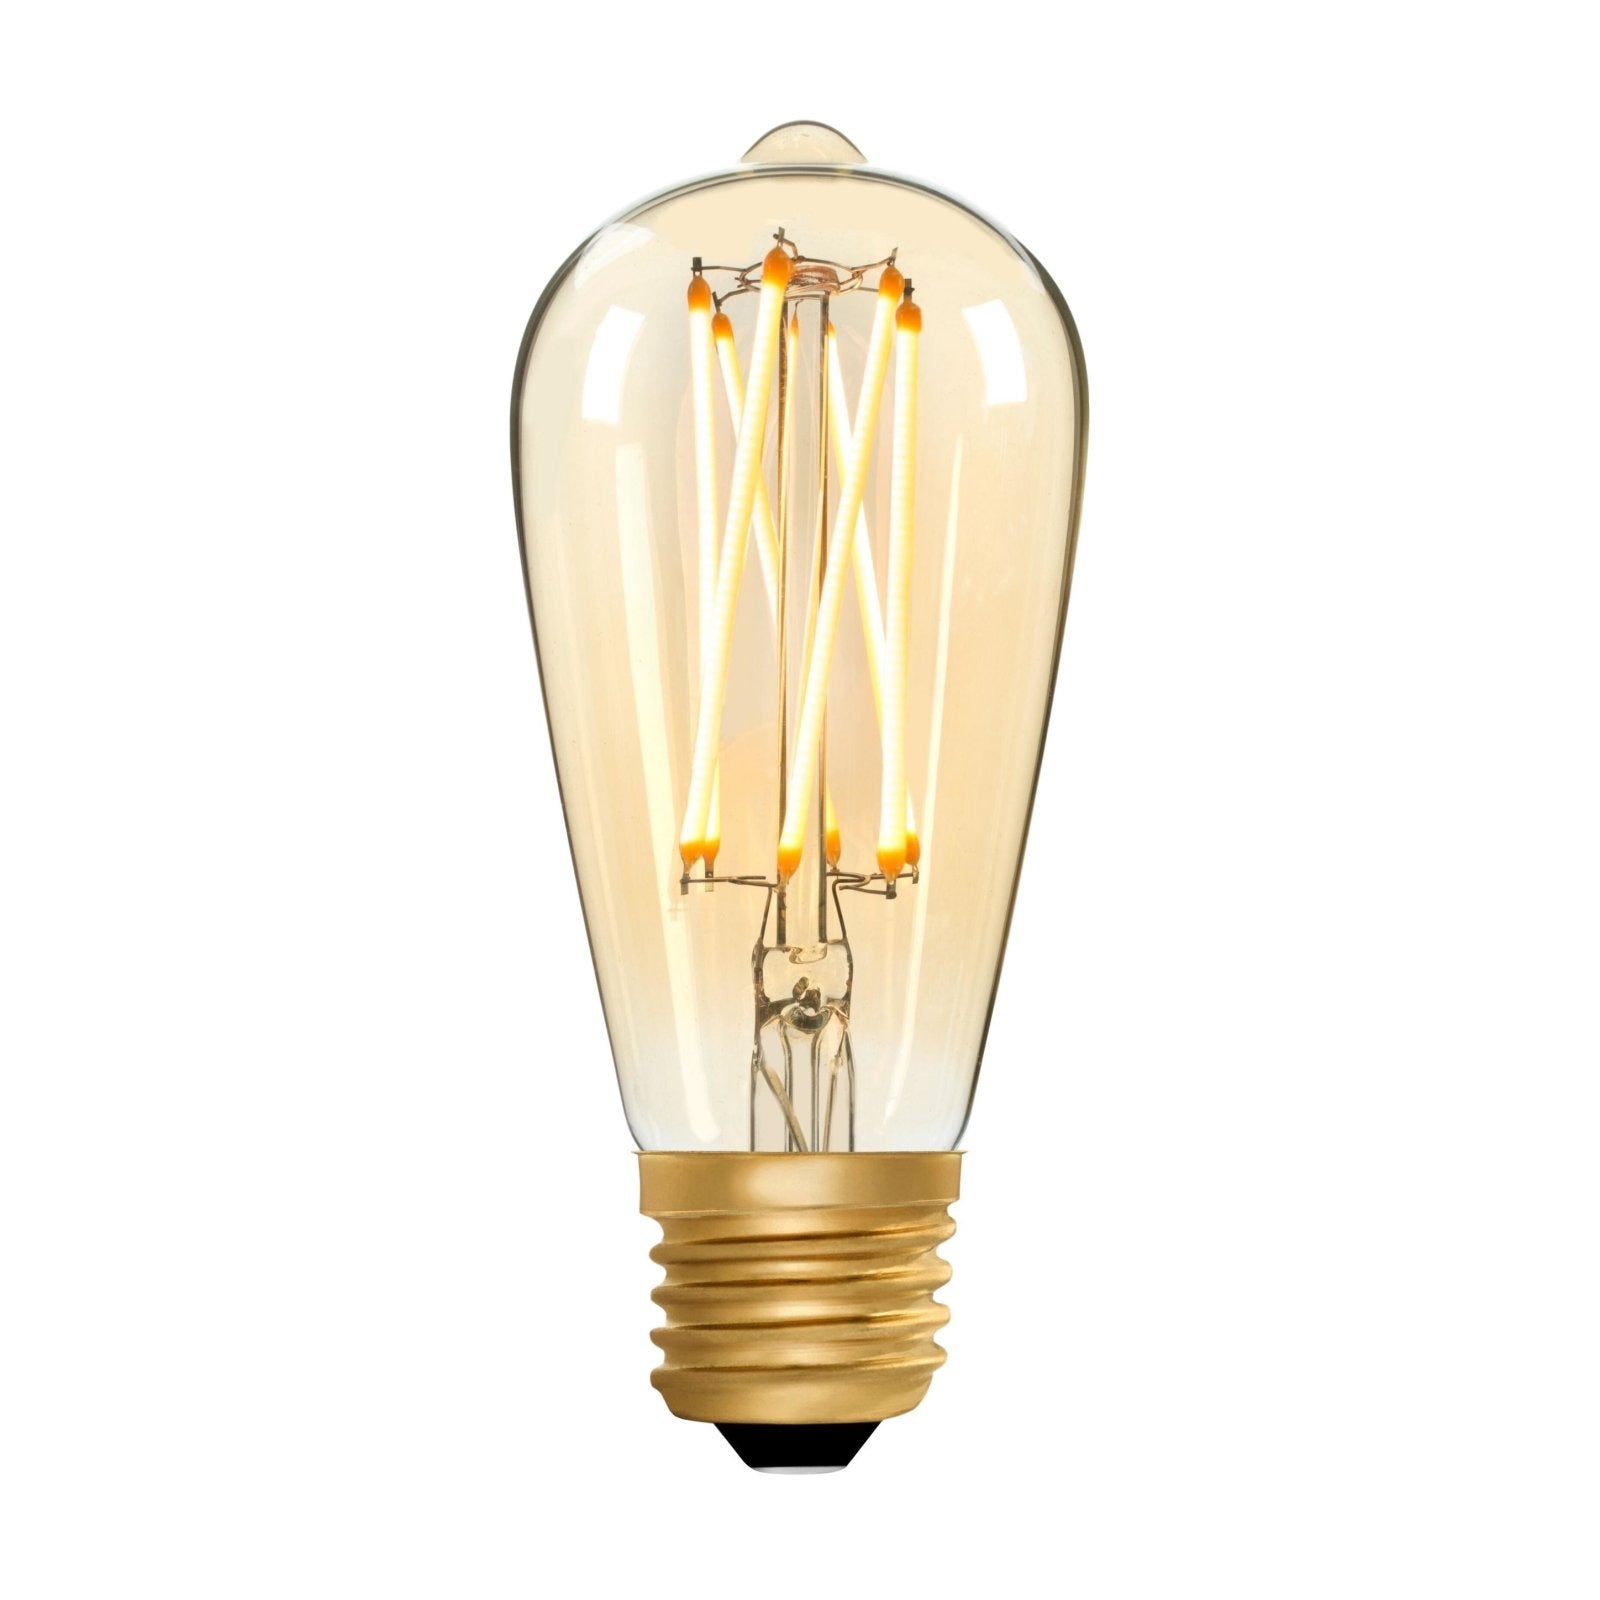 Squirrel Cage ST64 Amber 6W E27 2200K - LED Lamp from RETROLIGHT. Made by Zico Lighting.